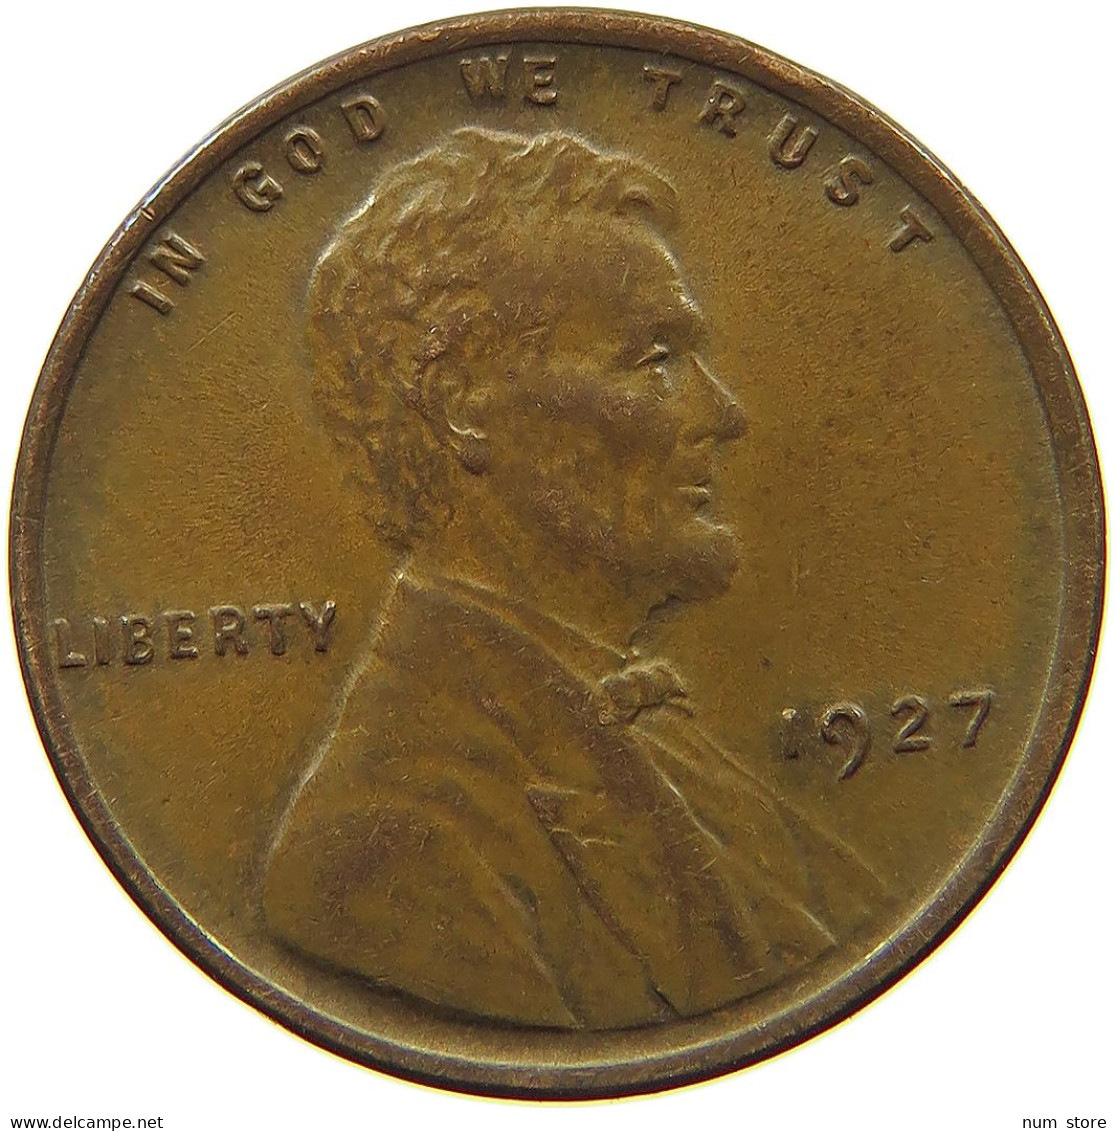 UNITED STATES OF AMERICA CENT 1927 Lincoln Wheat #t146 0359 - 1909-1958: Lincoln, Wheat Ears Reverse